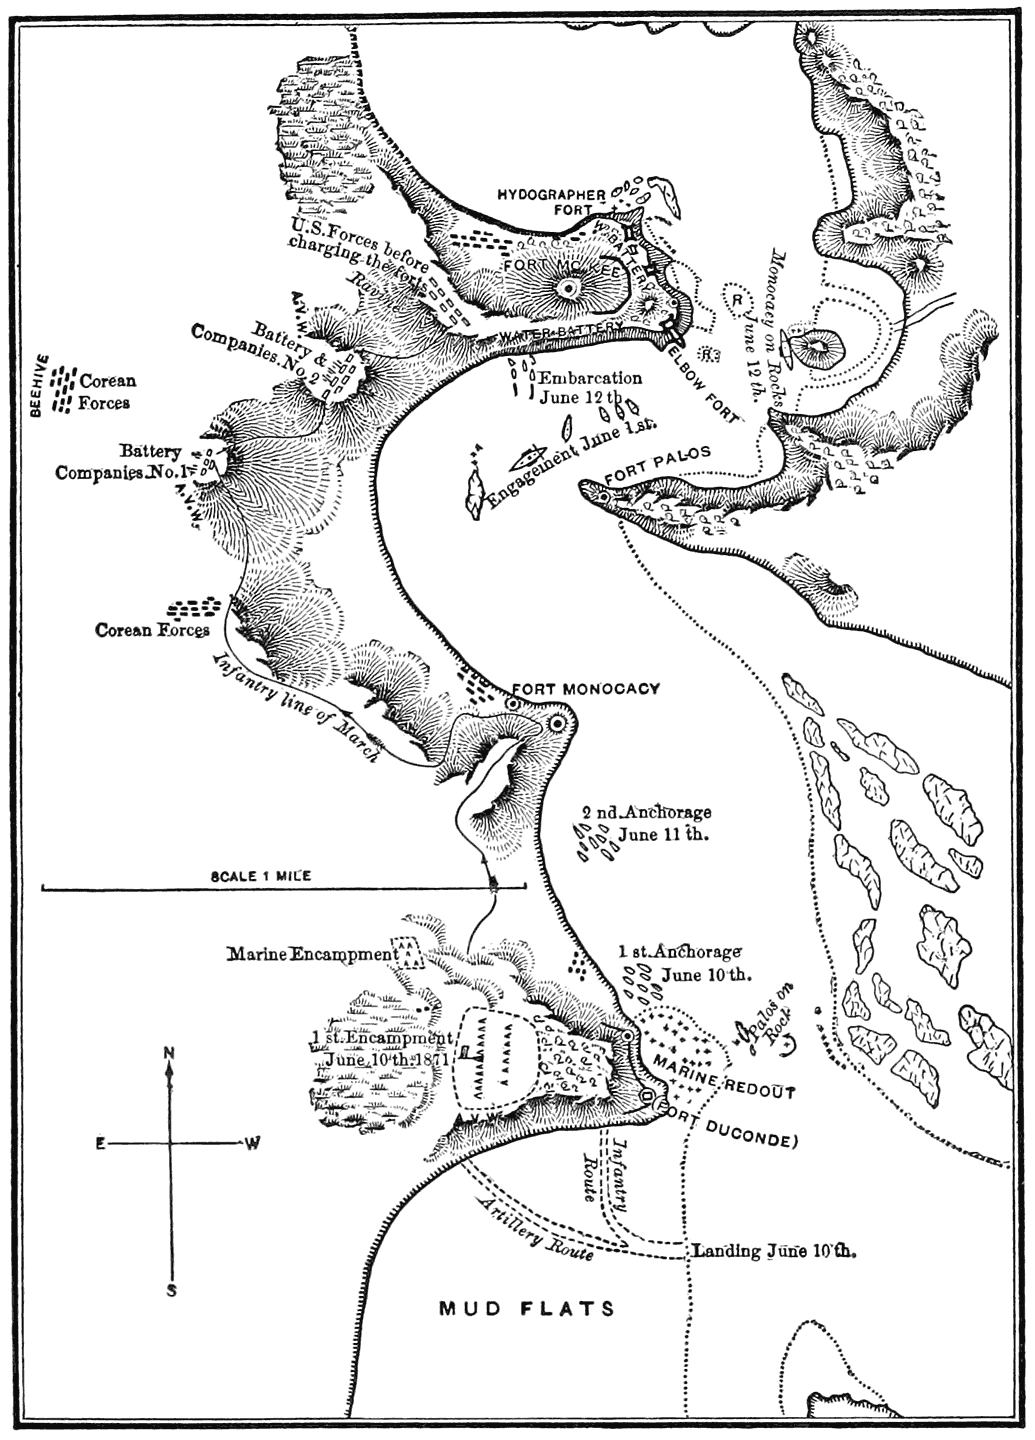 Map of the American Naval Operations in 1871.